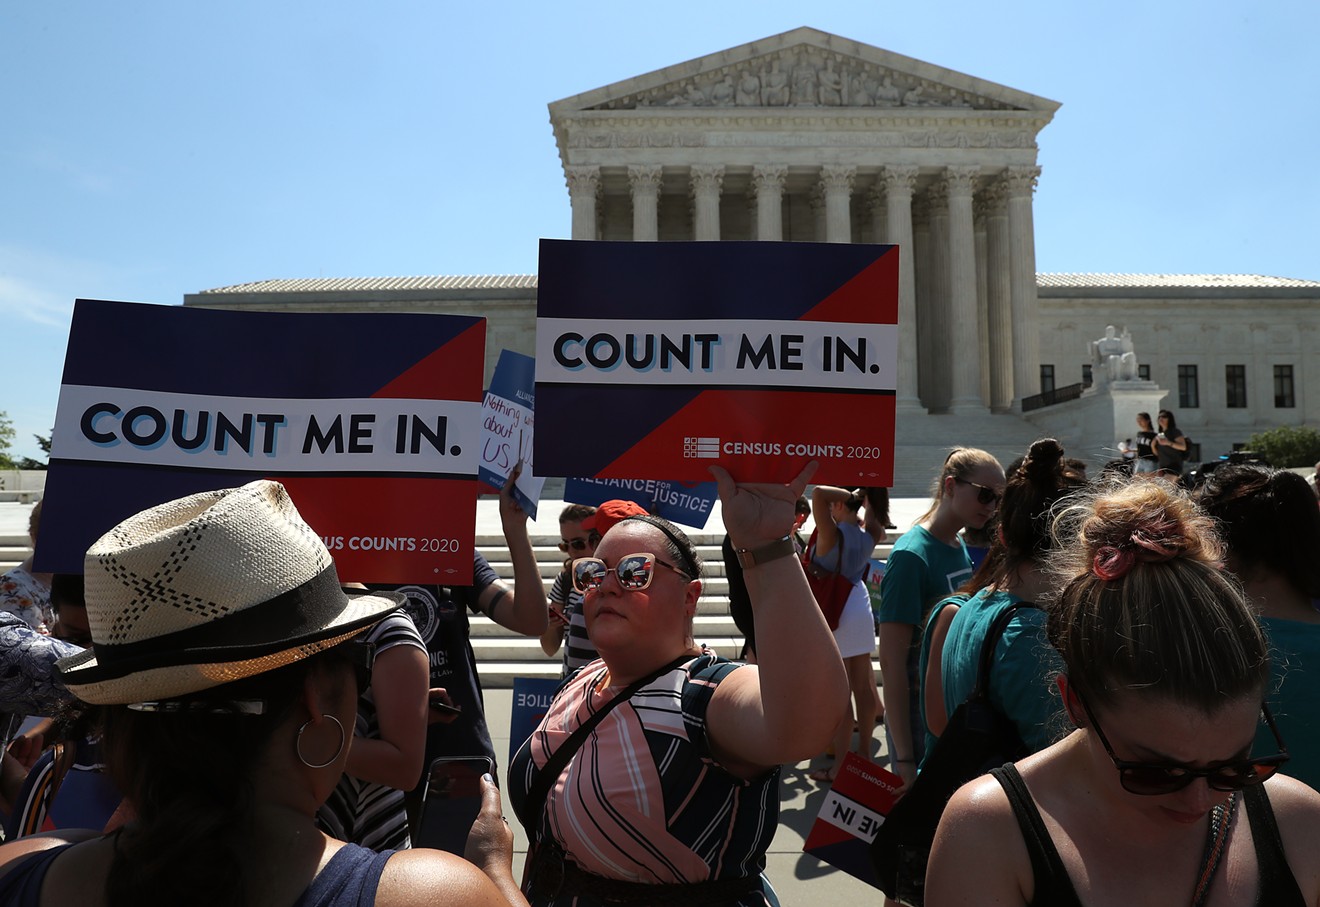 Activists gathered at the U.S. Supreme Court on Thursday ahead of an anticipated decision regarding the use of a so-called citizenship question on the 2020 census.